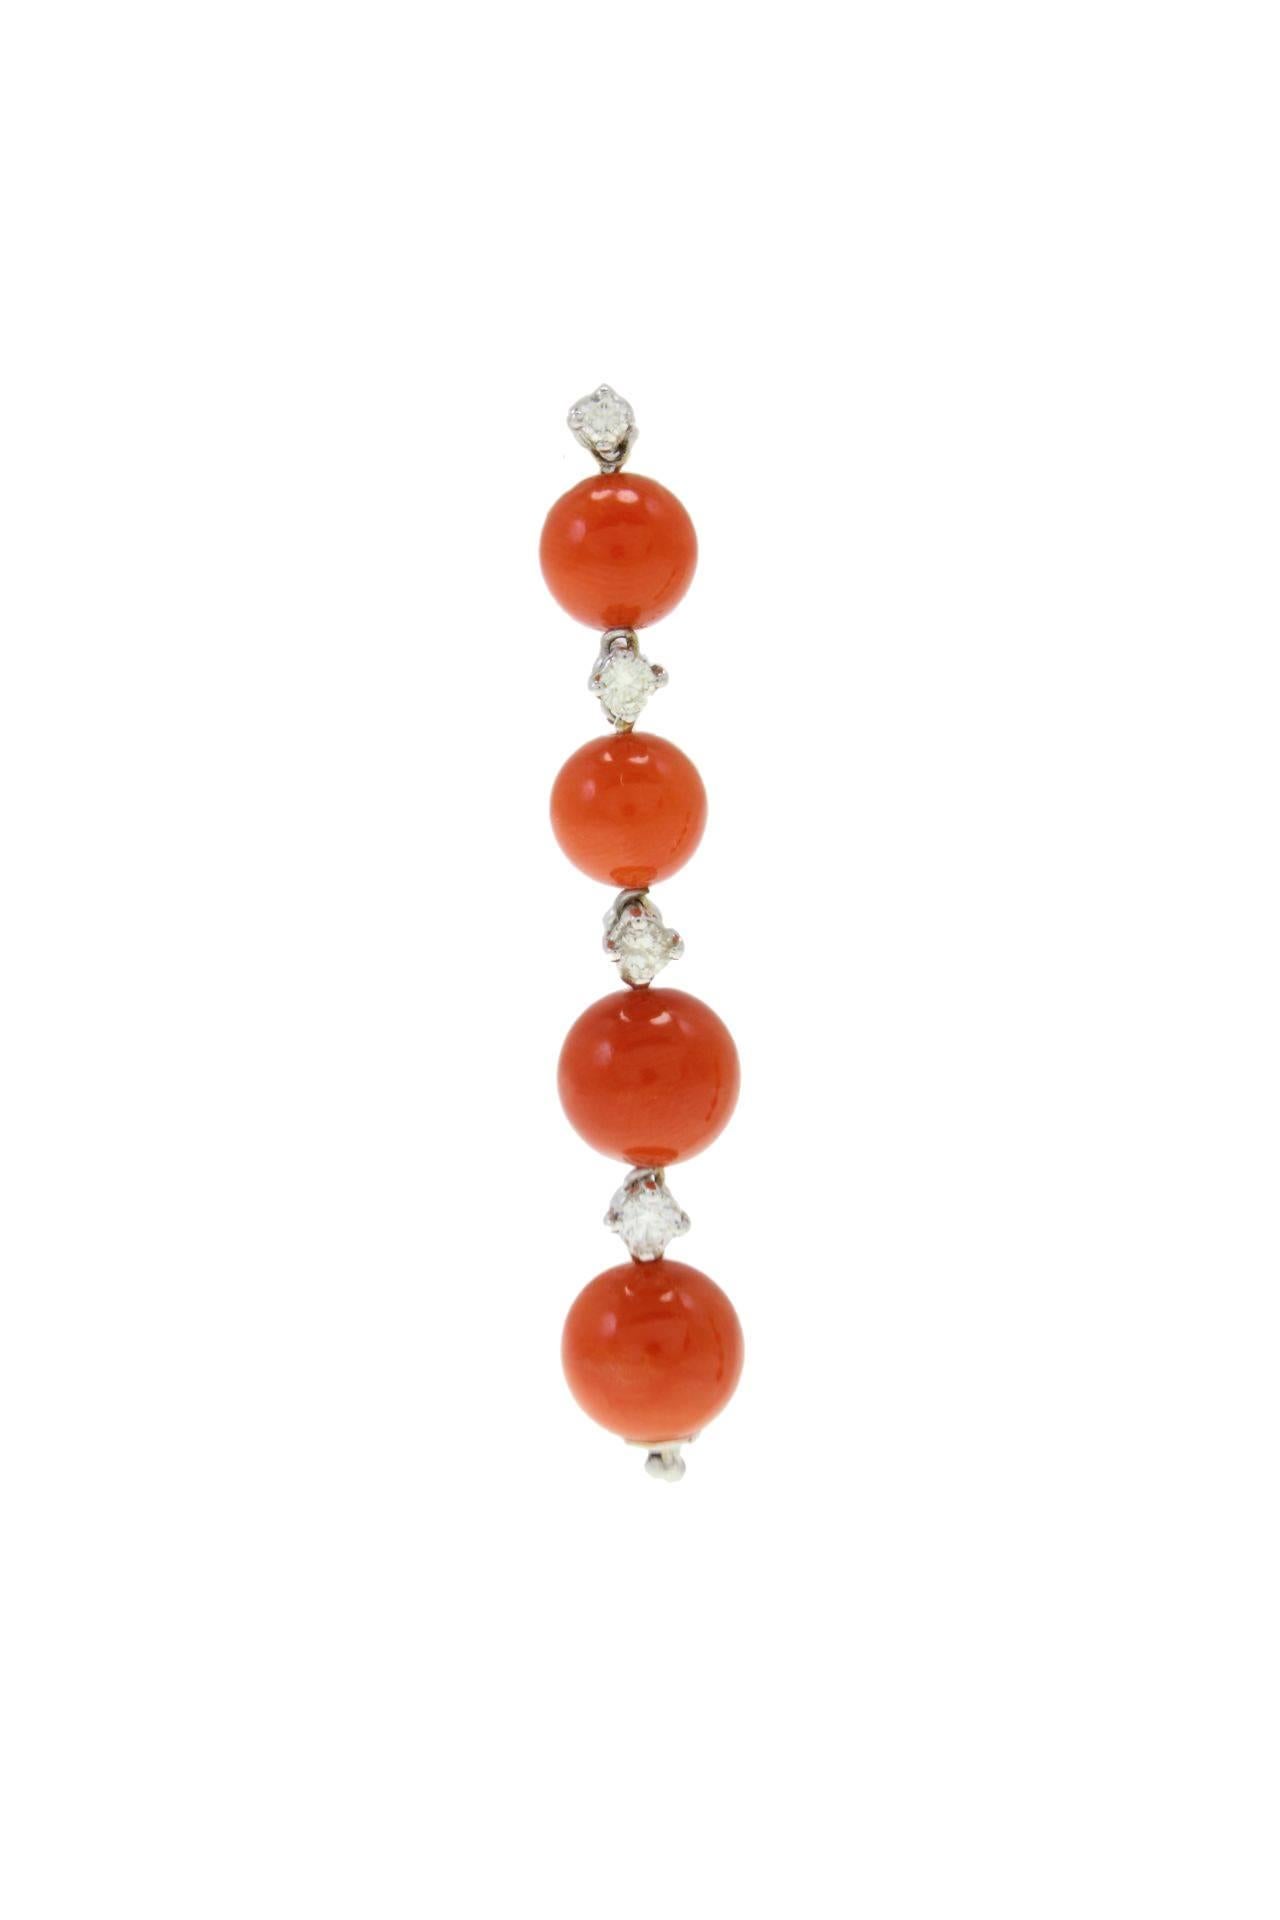 Diamonds and coral spheres are alternating to create these harmonious dangle earrings. All are set on 14Kt white gold.

Diamonds 0.52Kt
Coral 5.20 gr
Tot weight 7.4 gr

R.f. ucfc